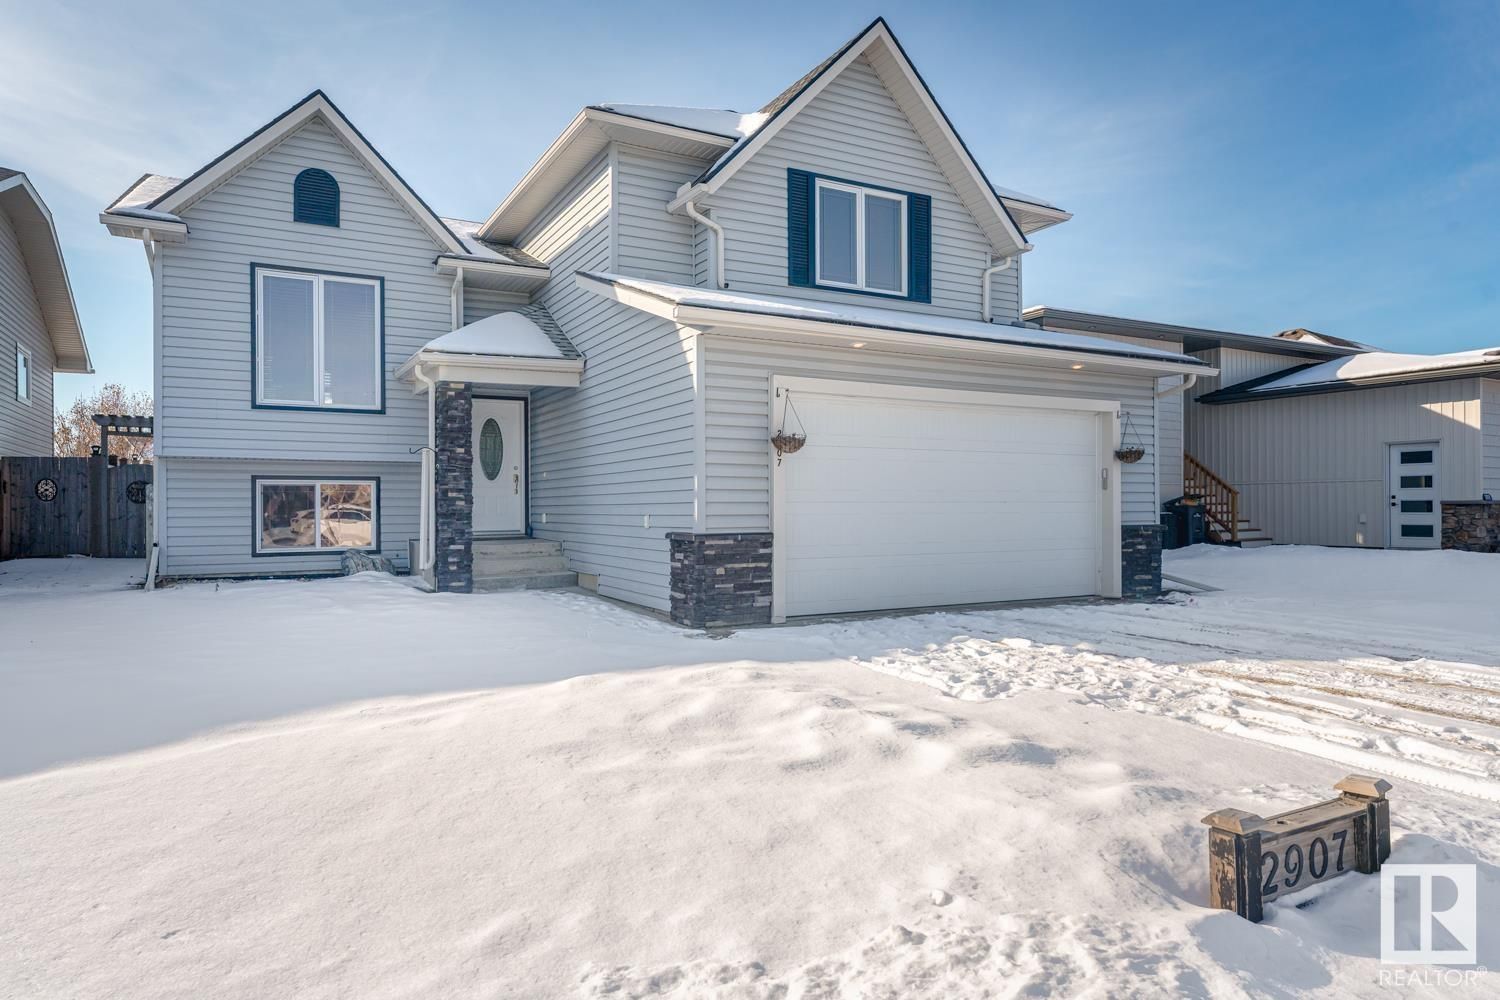 New property listed in Cold Lake, Cold Lake